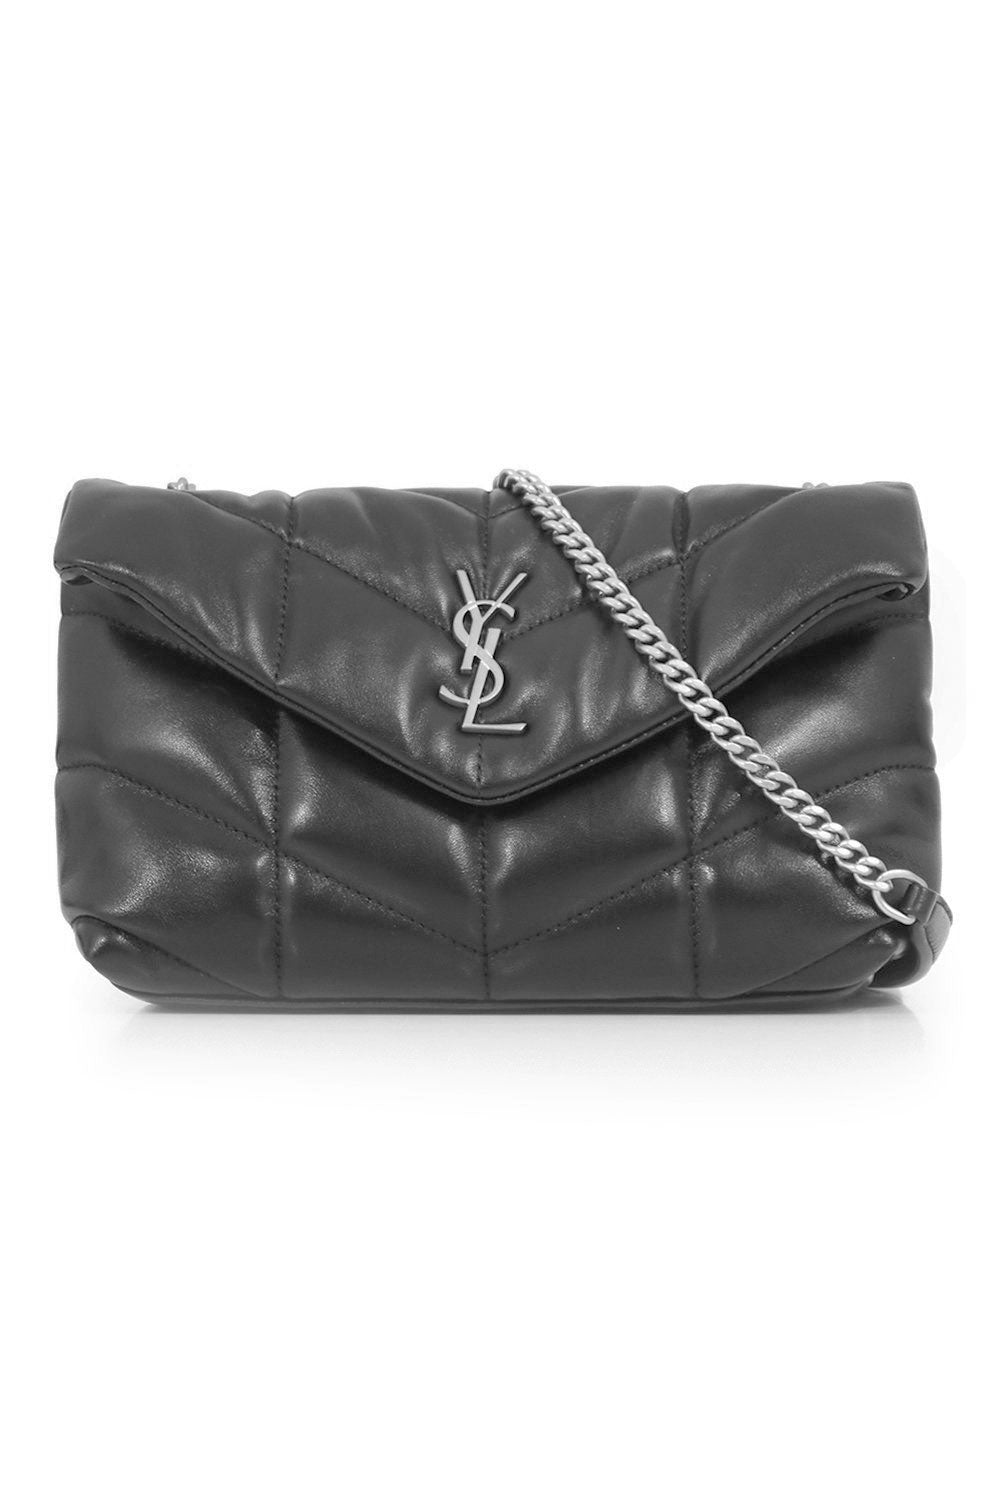 Saint Laurent Small Loulou Leather Puffer Bag - Black